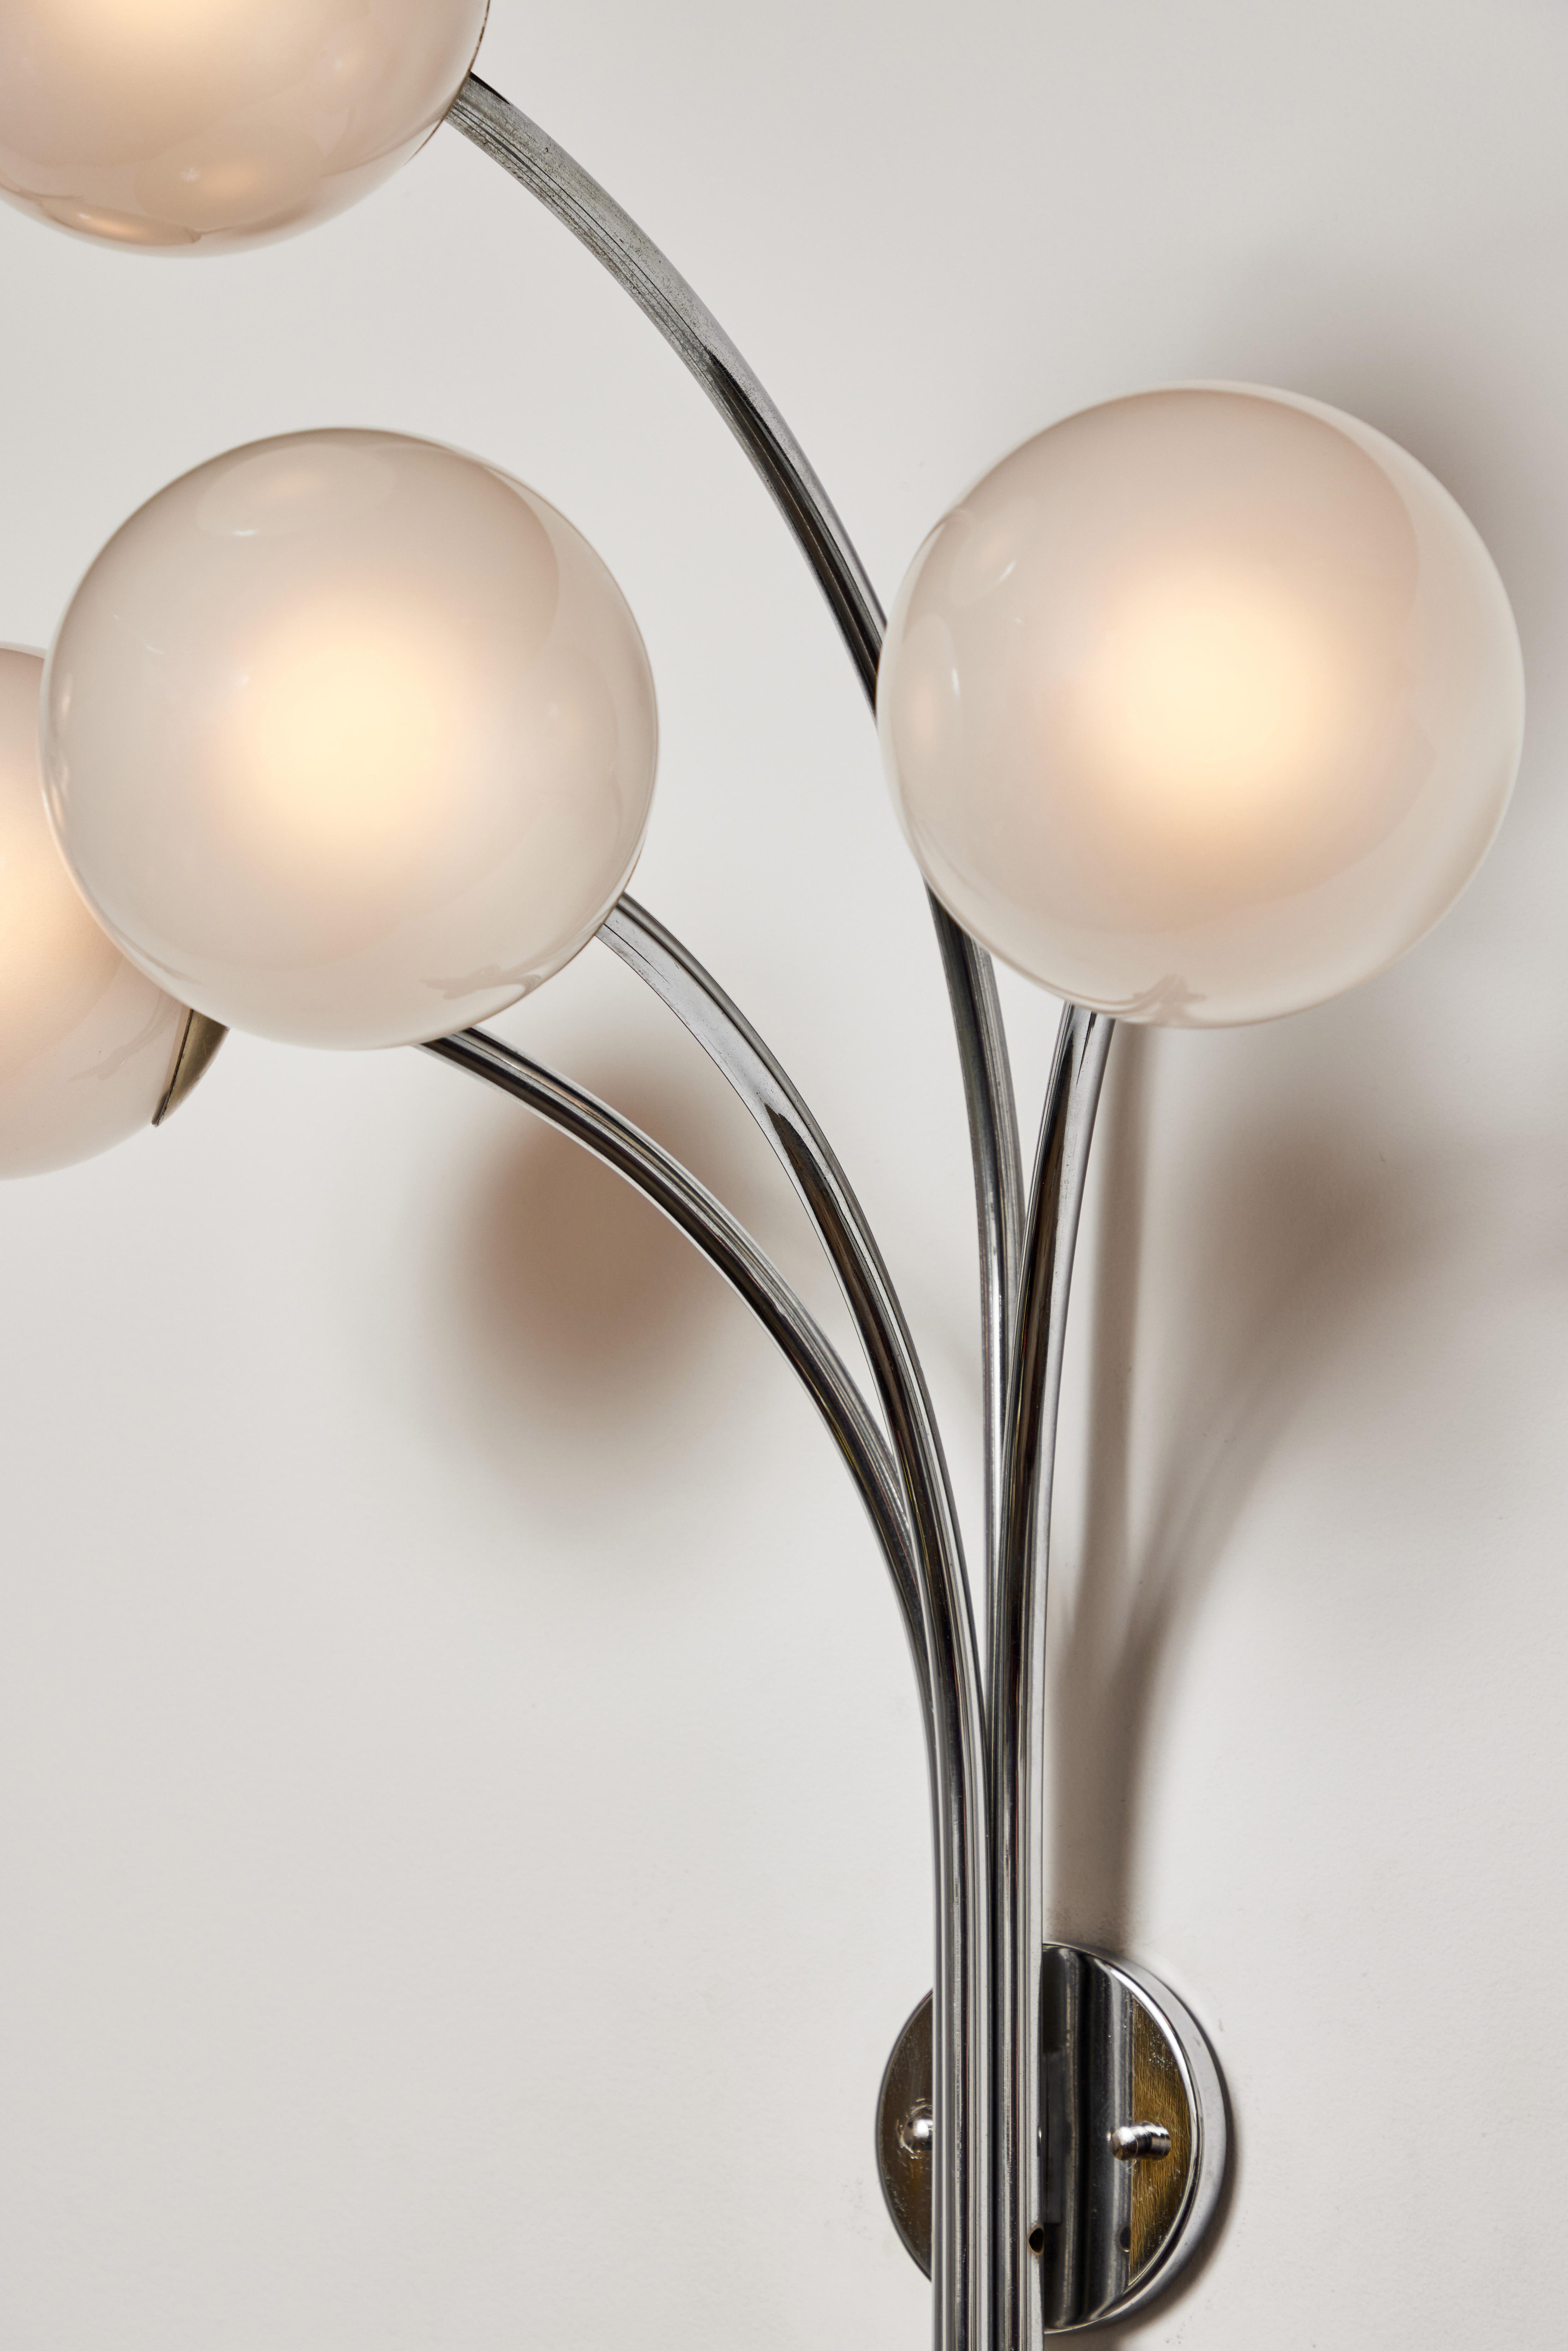 Mid-20th Century Pair of Model 257 Wall Lights by Sergio Asti for Arteluce For Sale